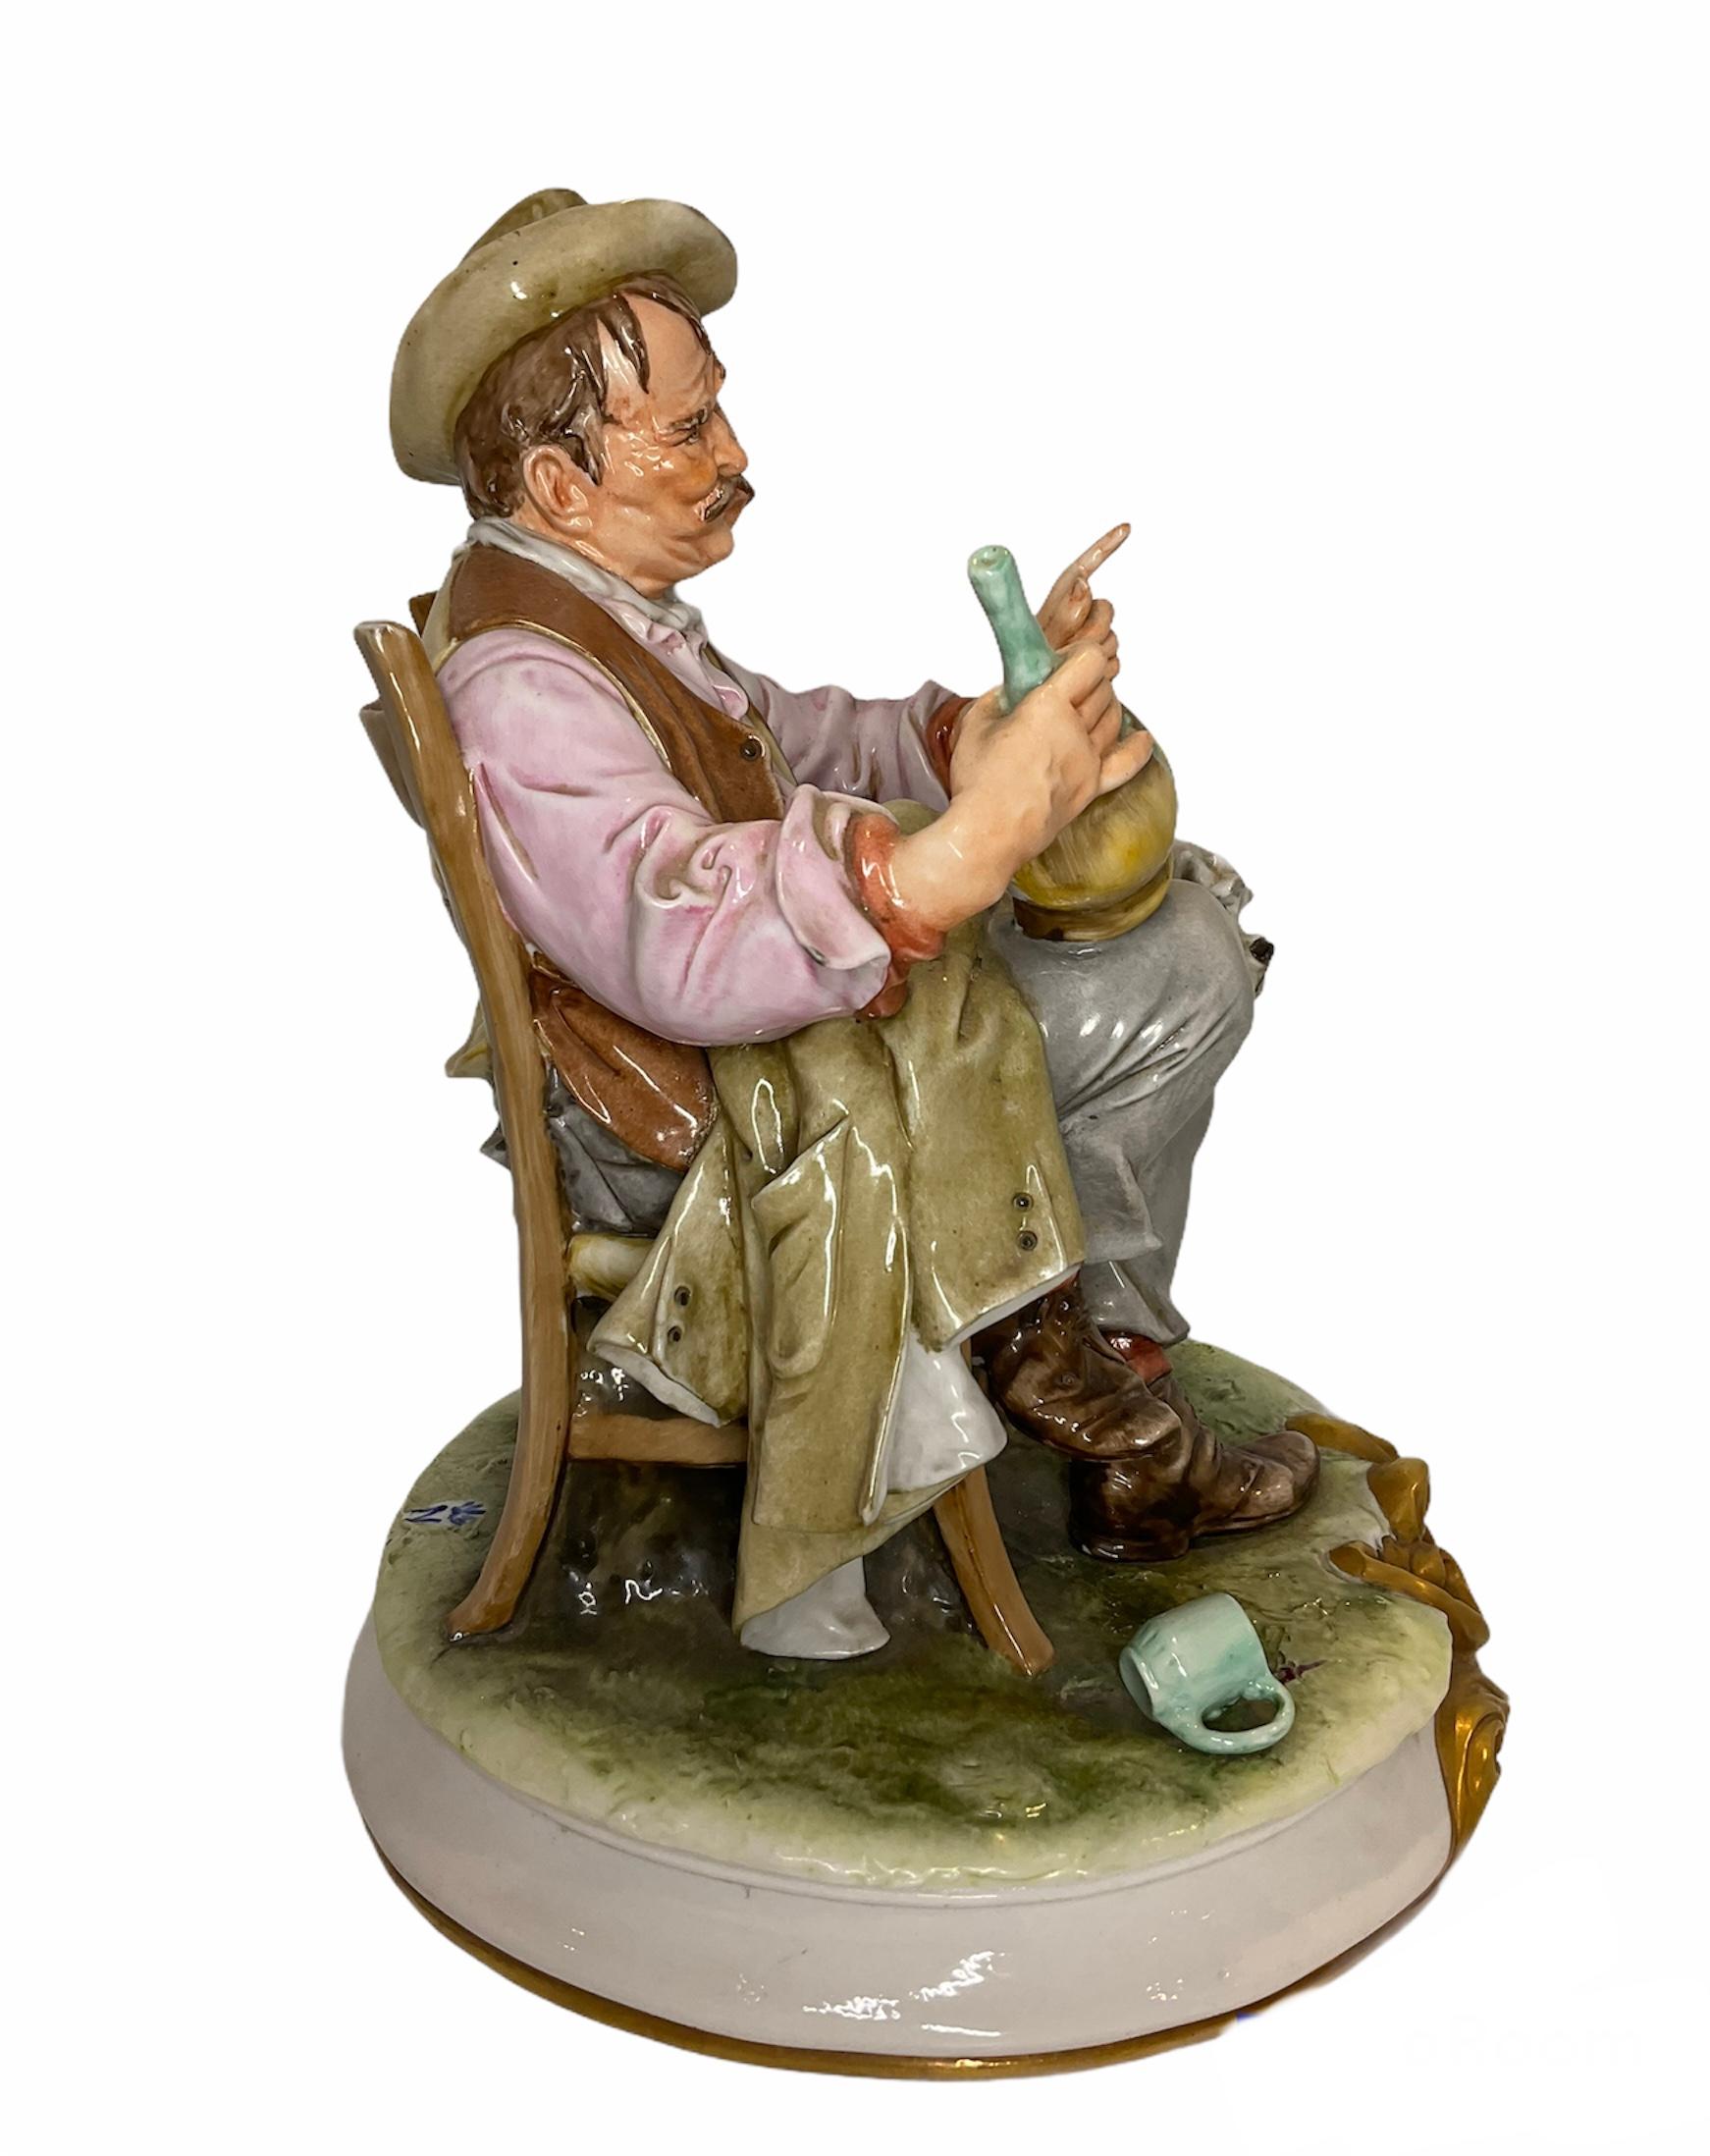 Italian Capodimonte Porcelain Sculpture of a Drunk Man and His Dog